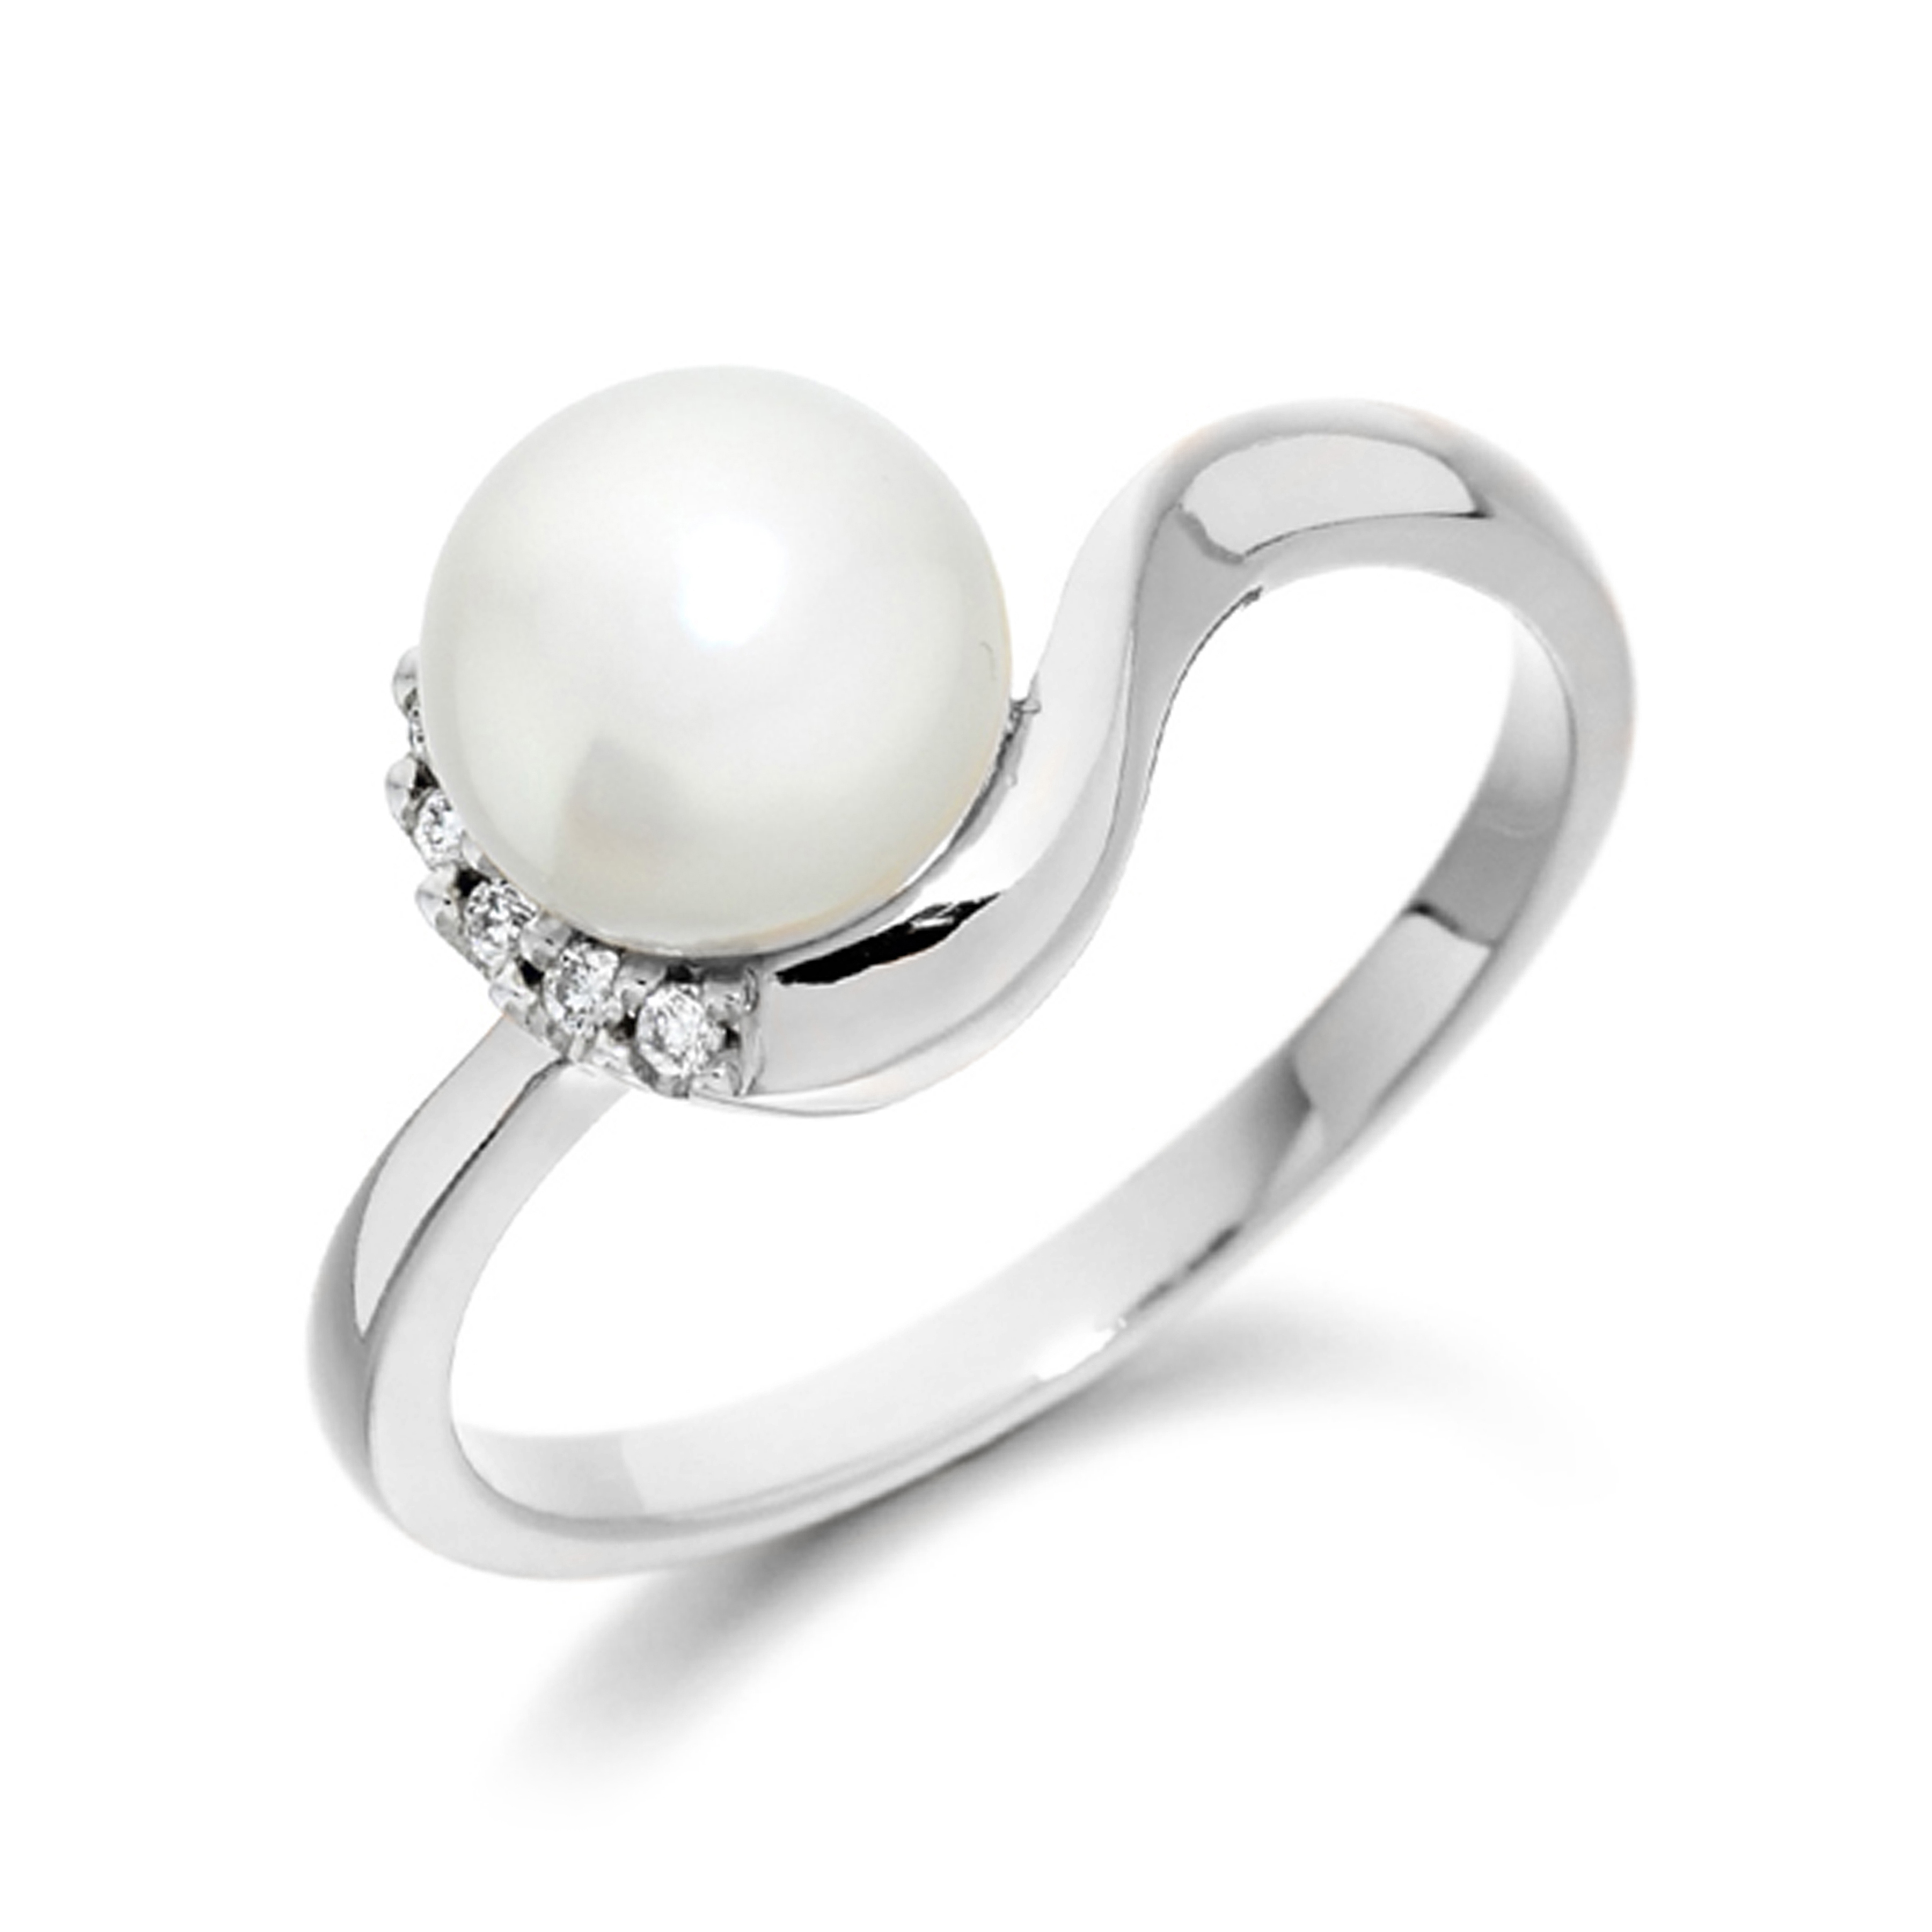 7mm Round White Pearl Stones On Shoulder Diamond And Pearl Engagement Ring